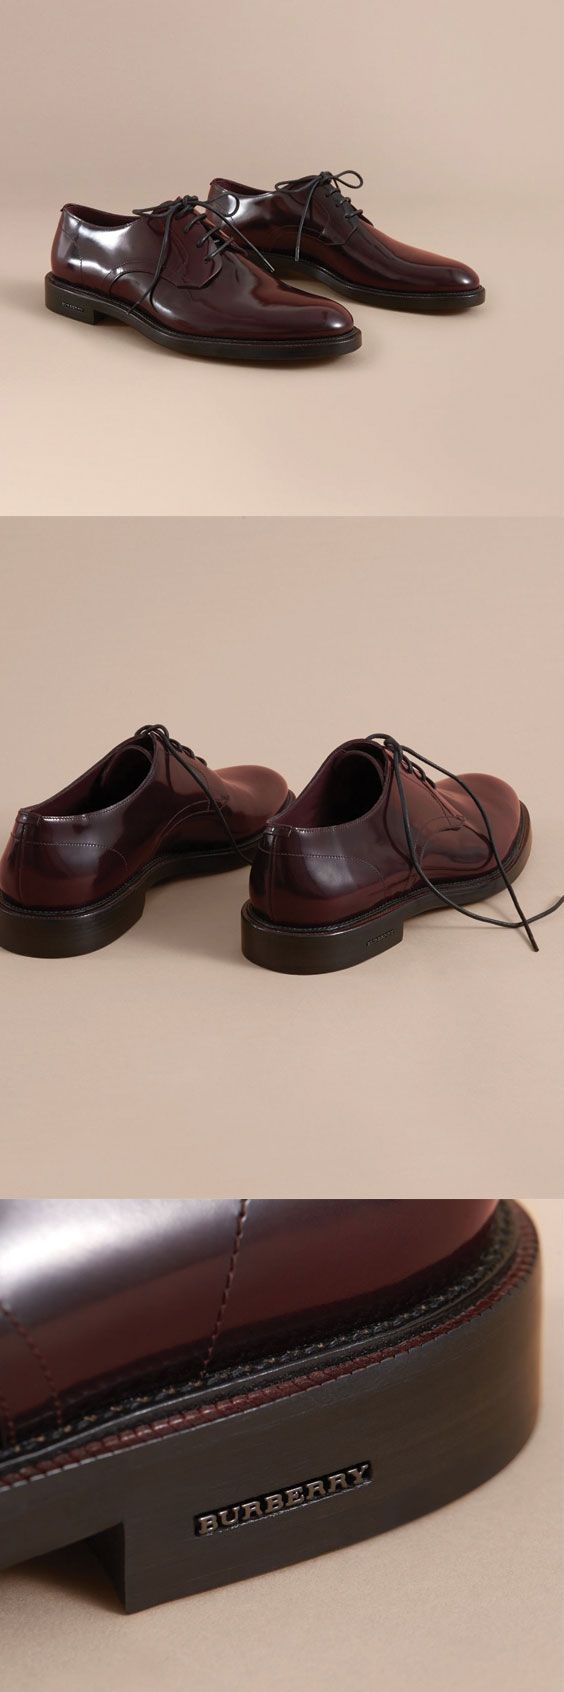 Burberry Polished Leather Derby Shoes $675